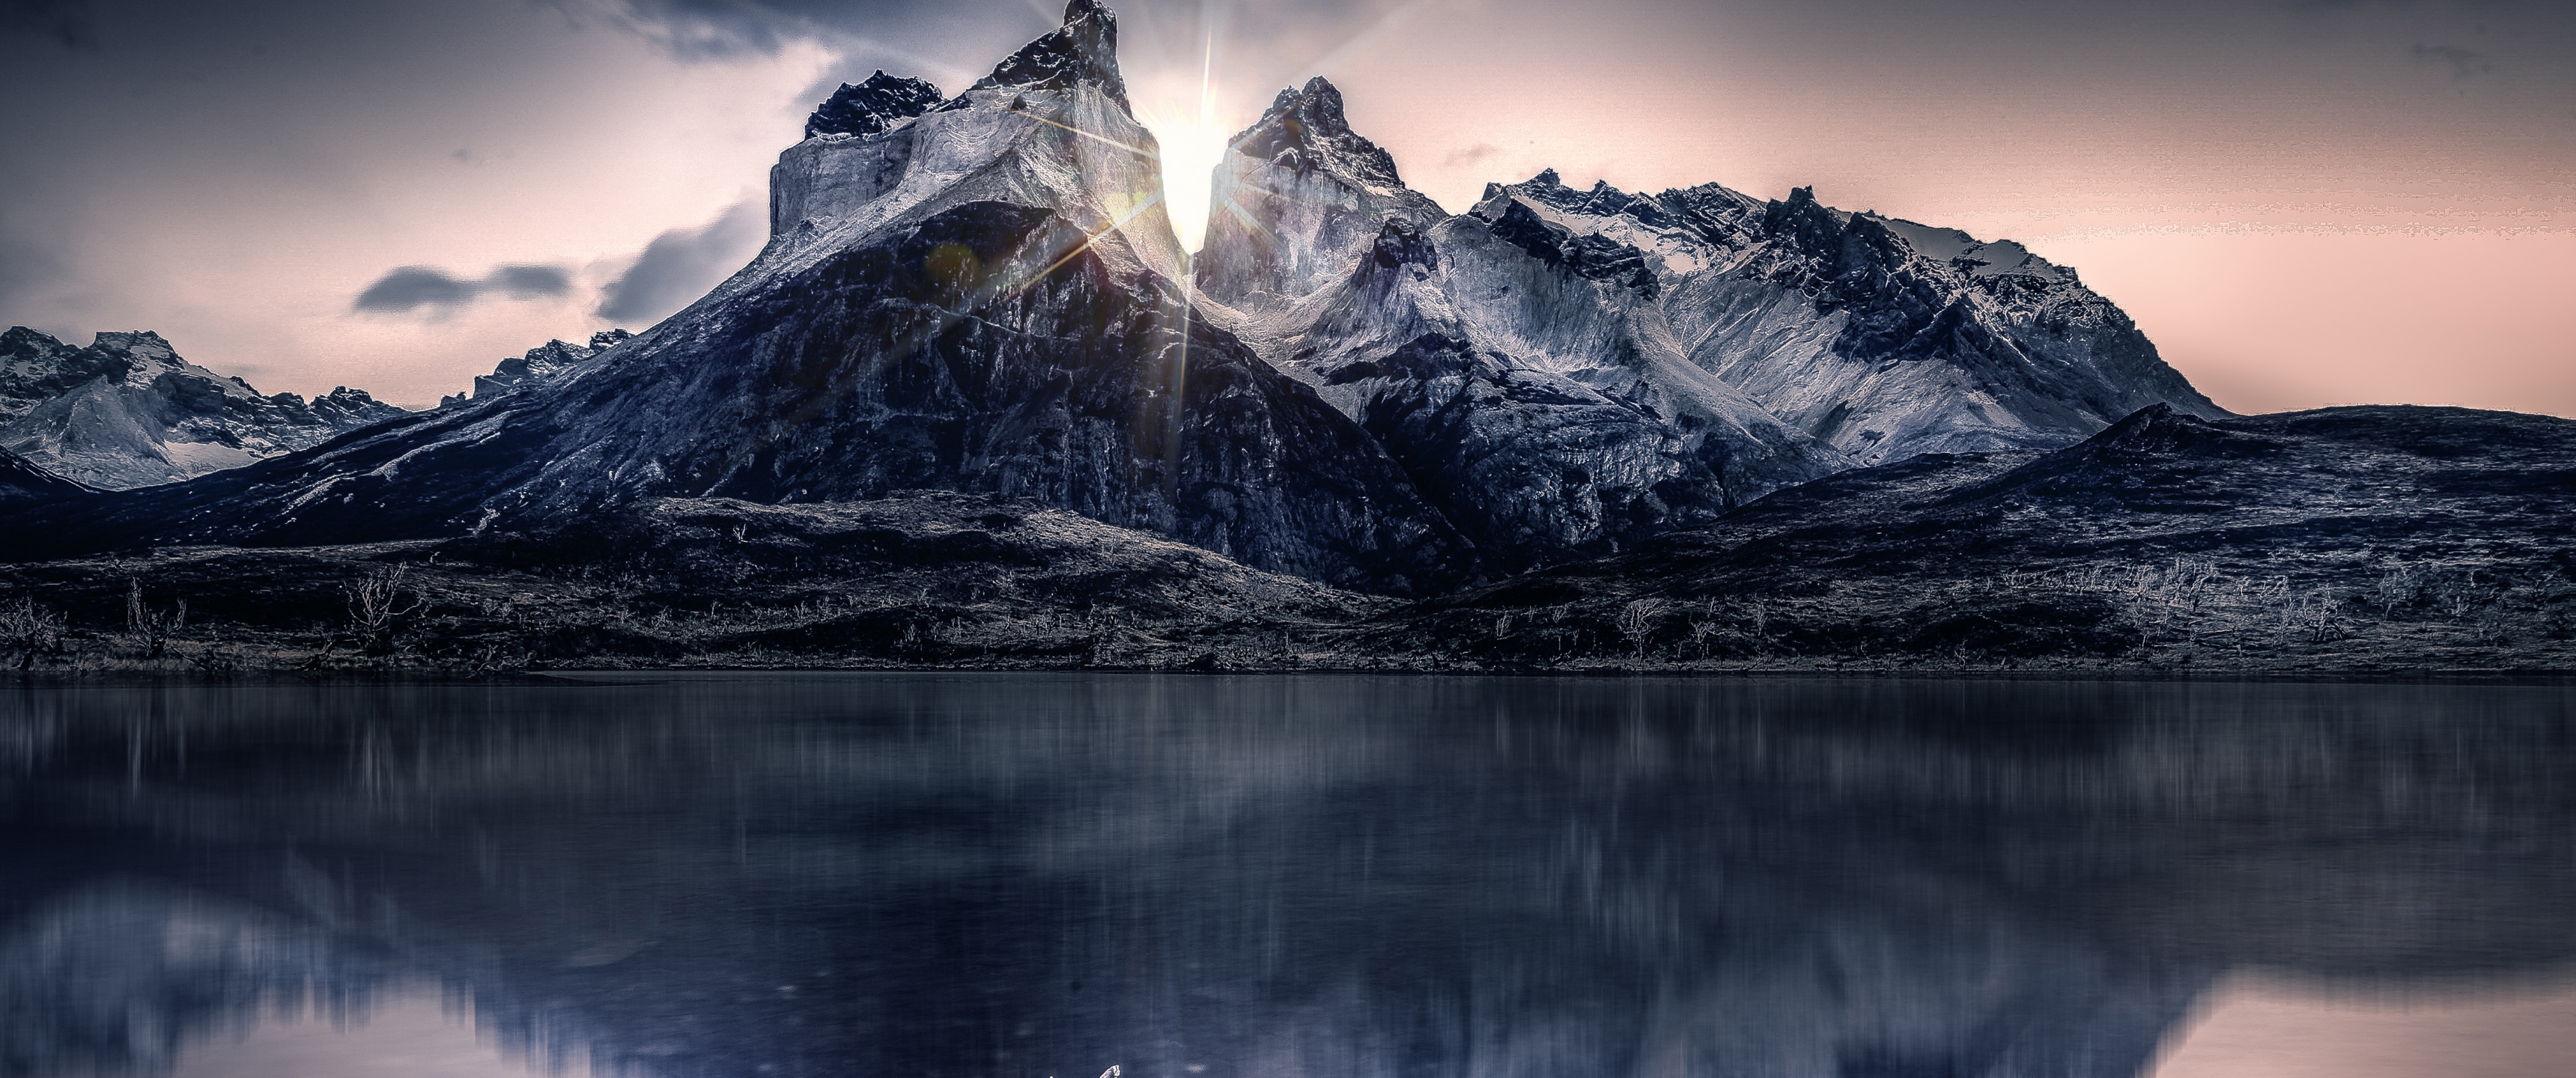 Amoled 4k wallpaper space Colorful and Astonishing planet and mountain  reflecting on lake - wallpapers 4K - Wallpaper